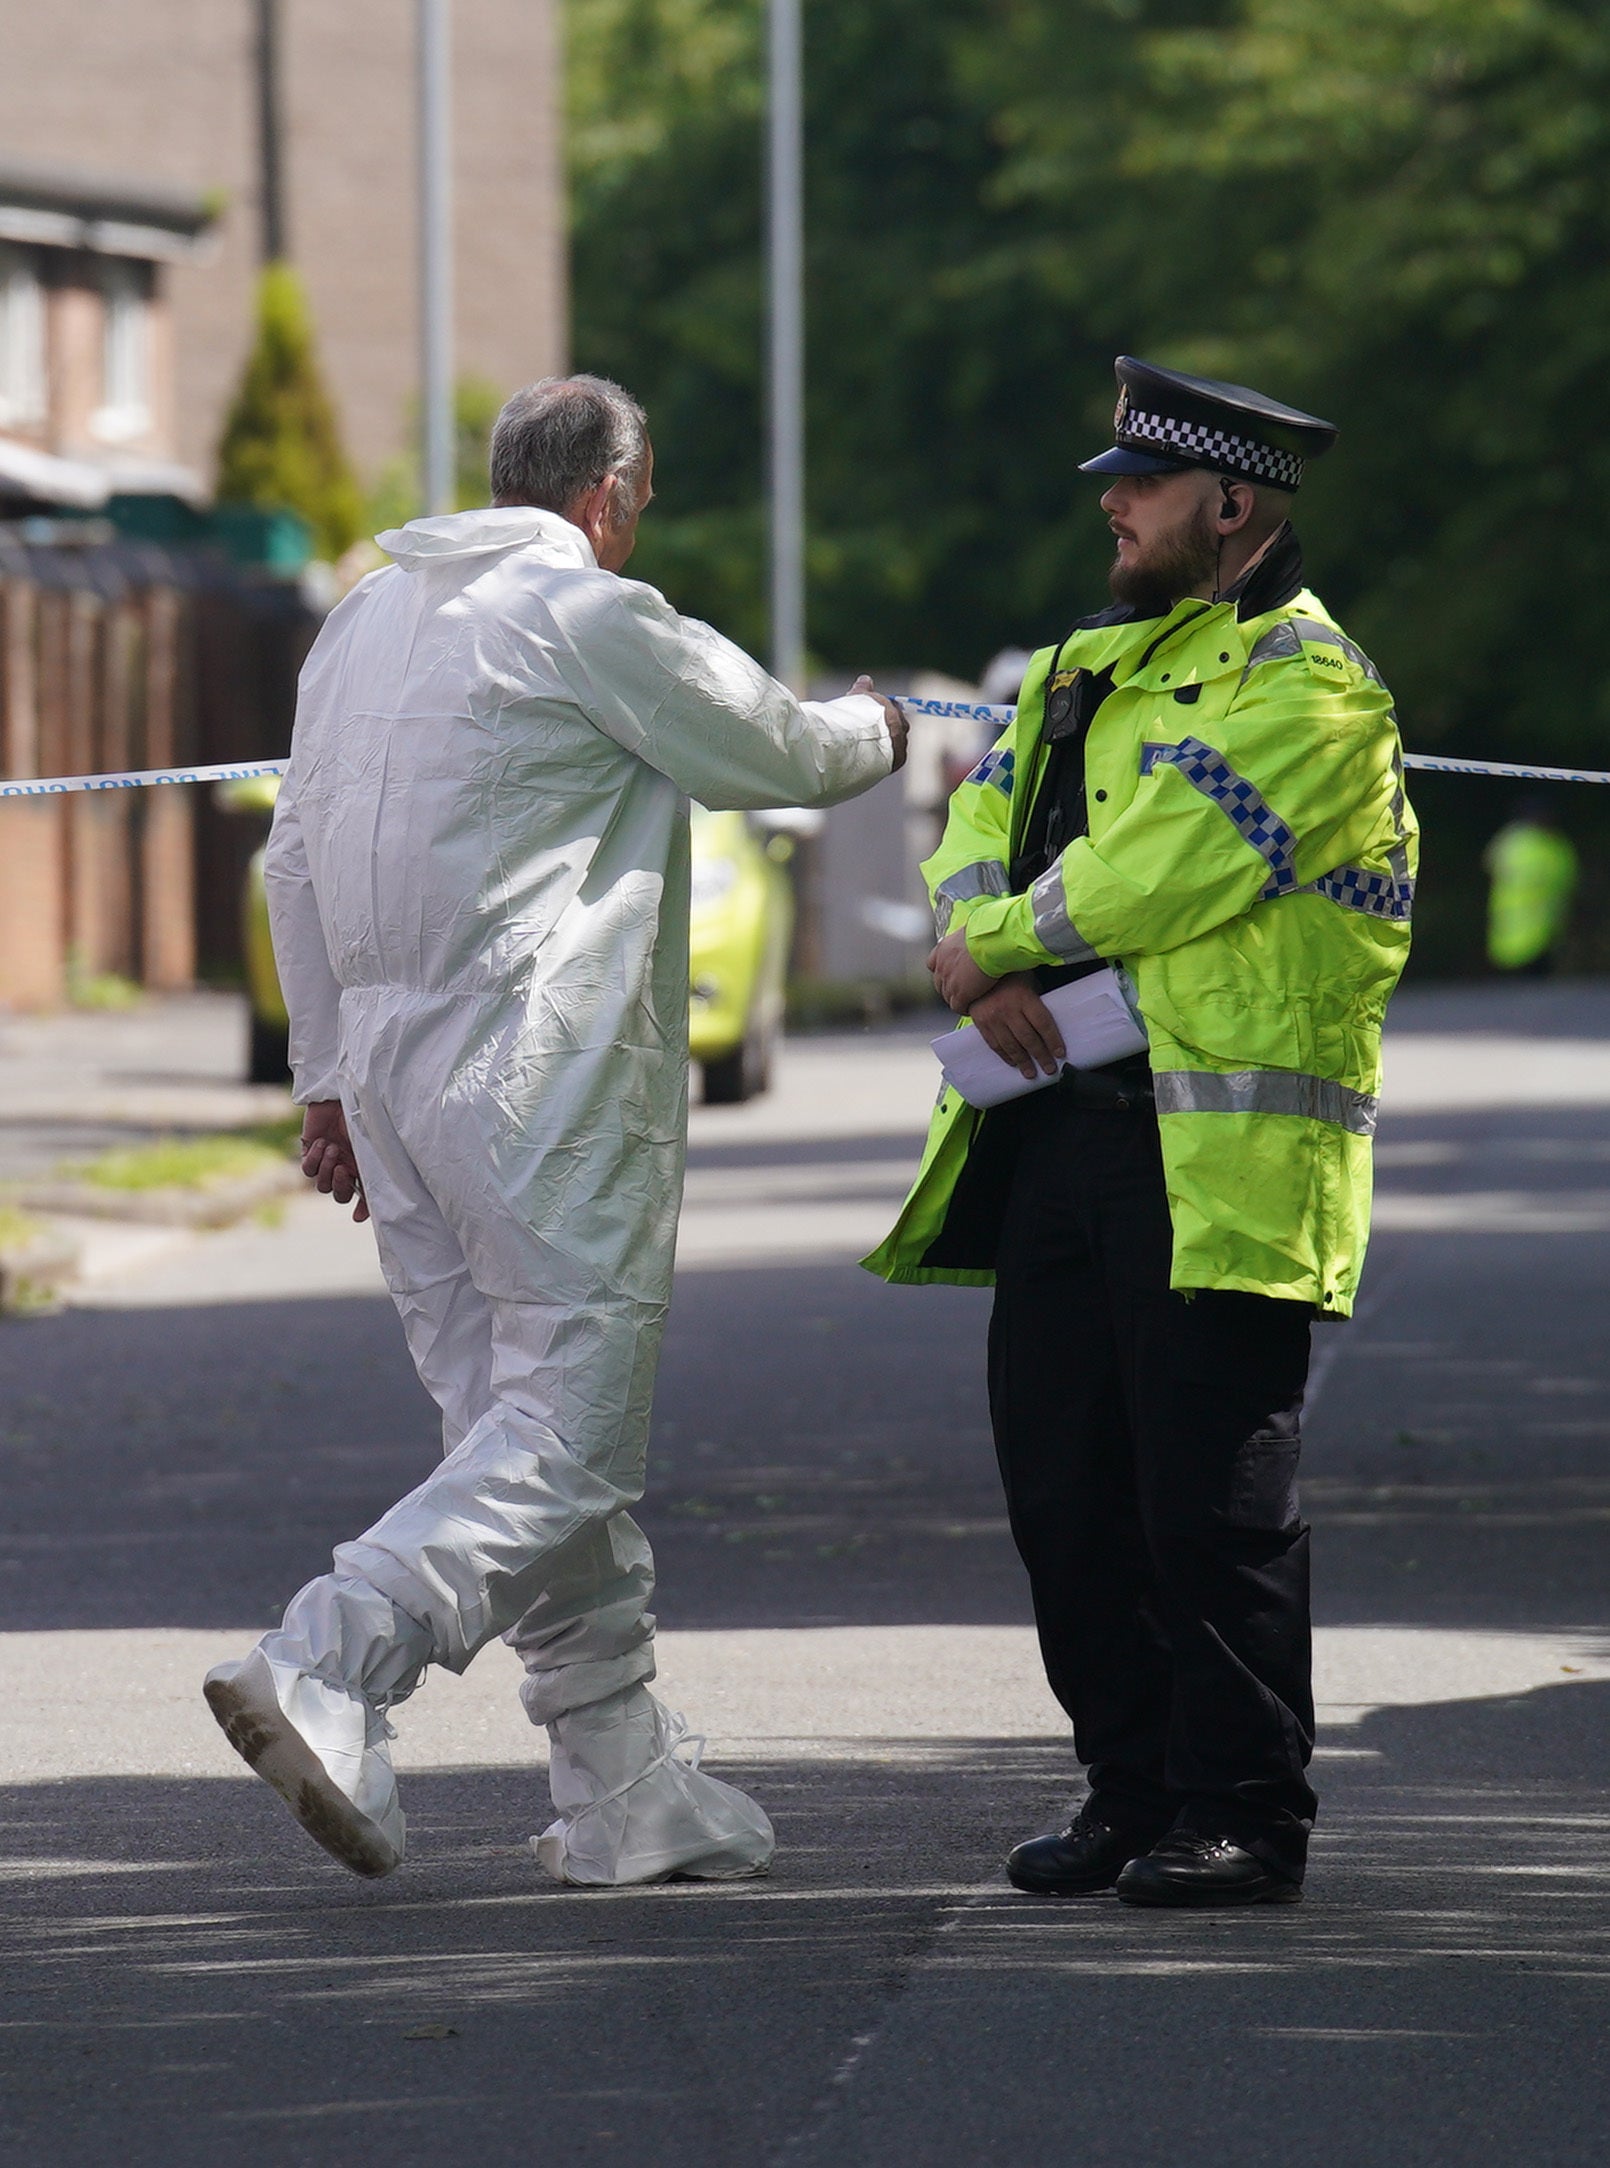 Forensics officers have been carrying out investigations at the property